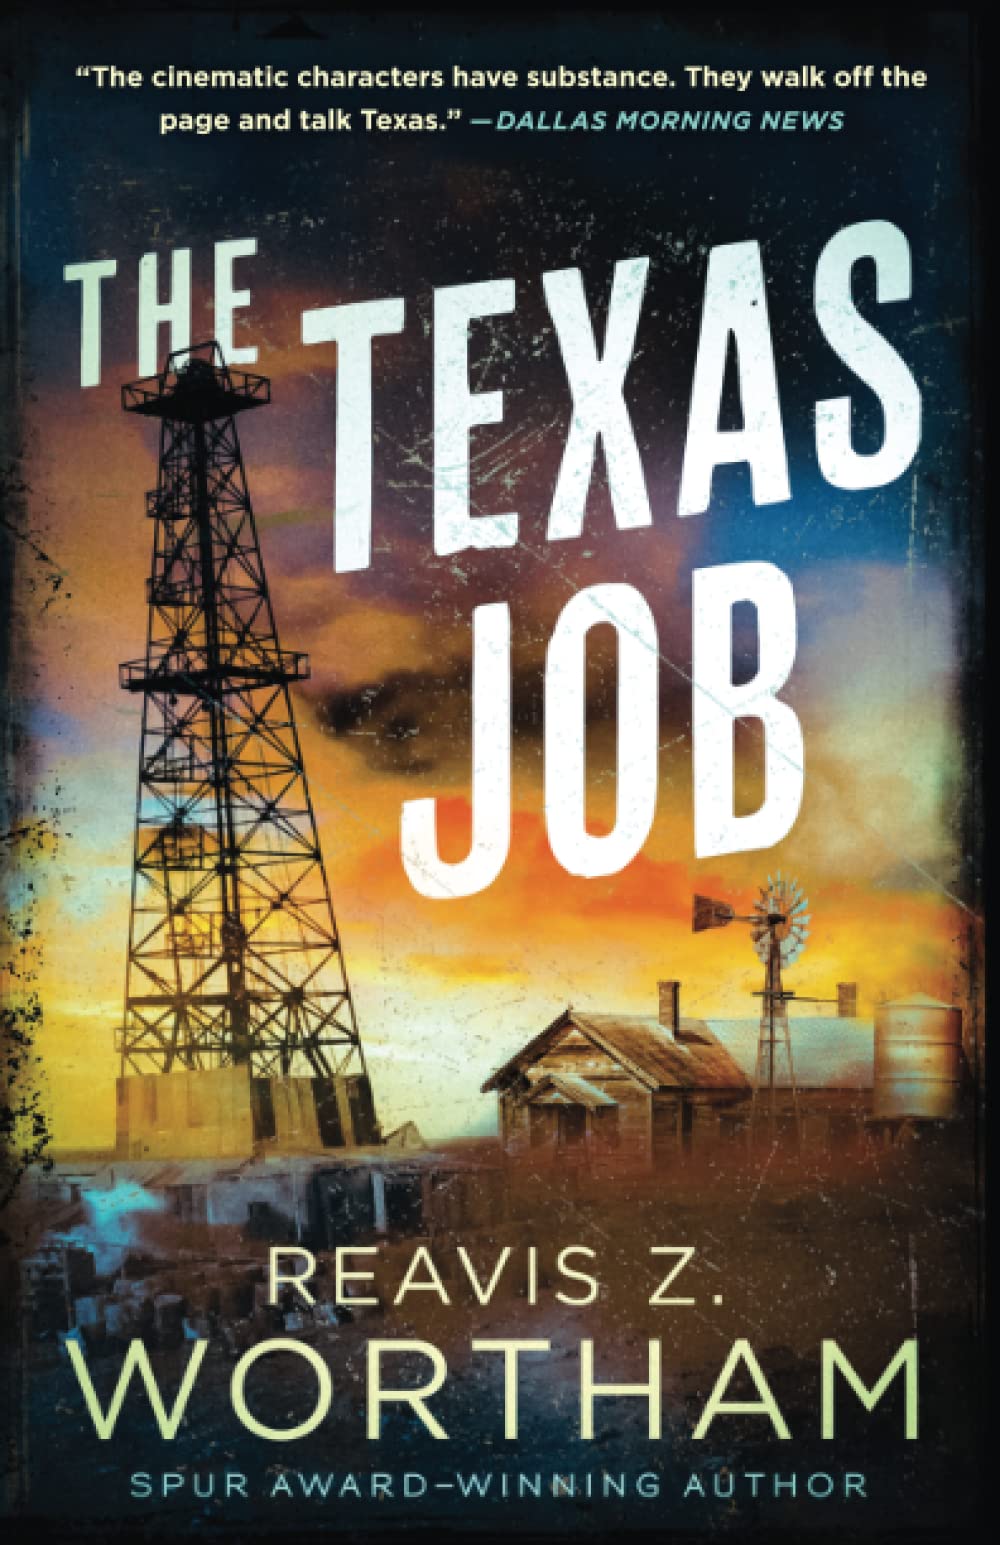 Book cover for "The Texas Job" by Reavis Z. Wortham